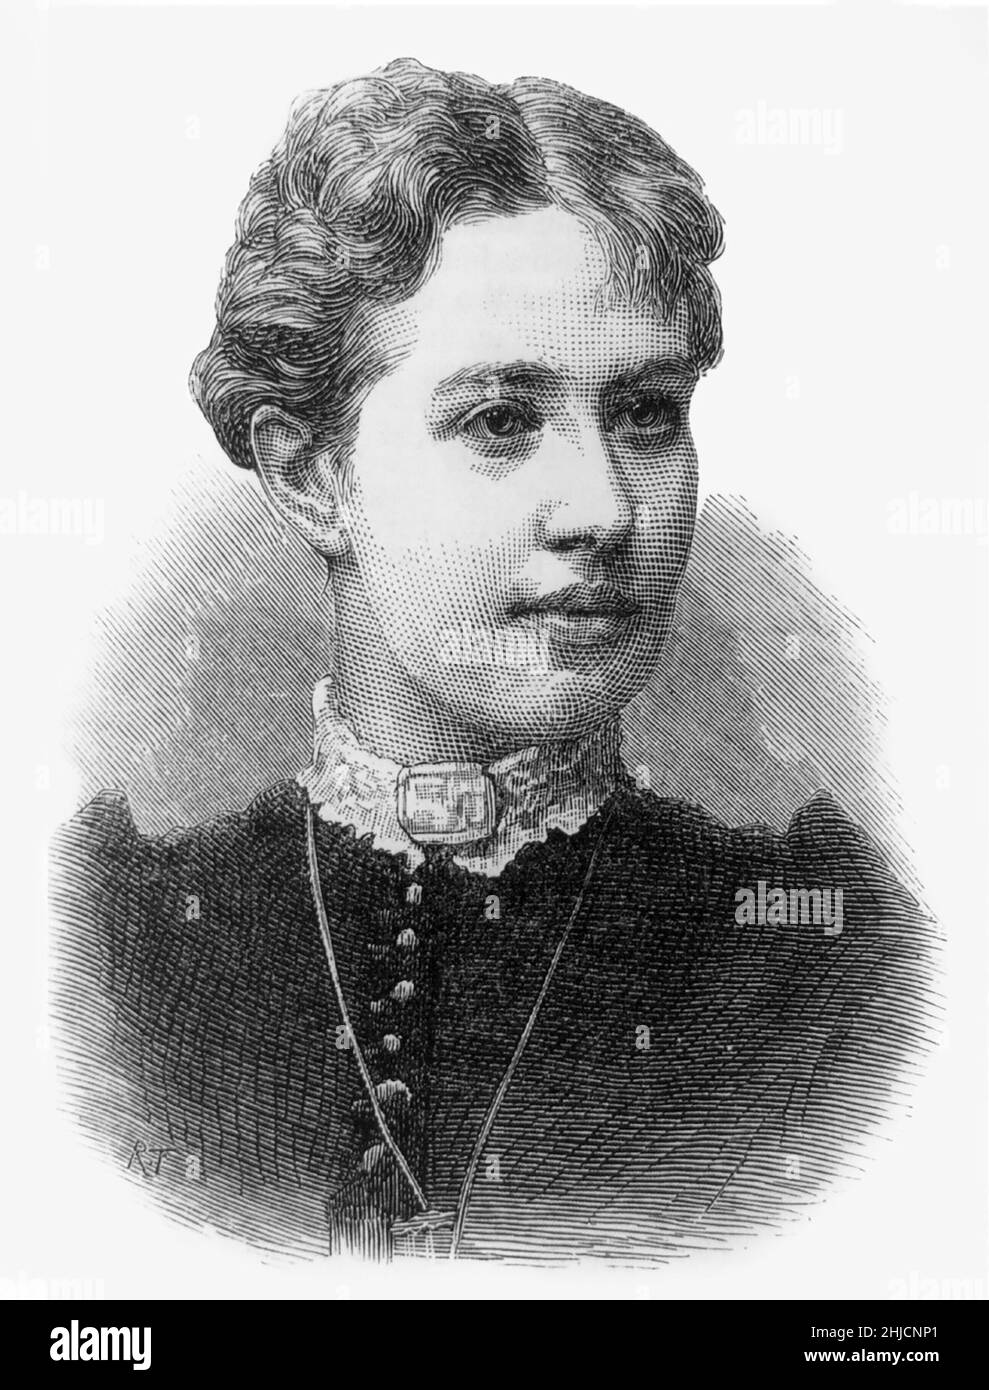 Sofia Vasilyevna Kovalevskaya (1850-1891) was a Russian mathematician, the first woman in Europe to earn a doctorate degree in mathematics. In 1888 she won the Prix Bordin of the French Academy of Science for her groundbreaking paper On the Rotation of a Solid Body about a Fixed Point. In 1889 she was appointed Professor Ordinarius at Stockholm University, another groundbreaking position for a woman. Engraving from The Illustrated London News, 1884. Stock Photo